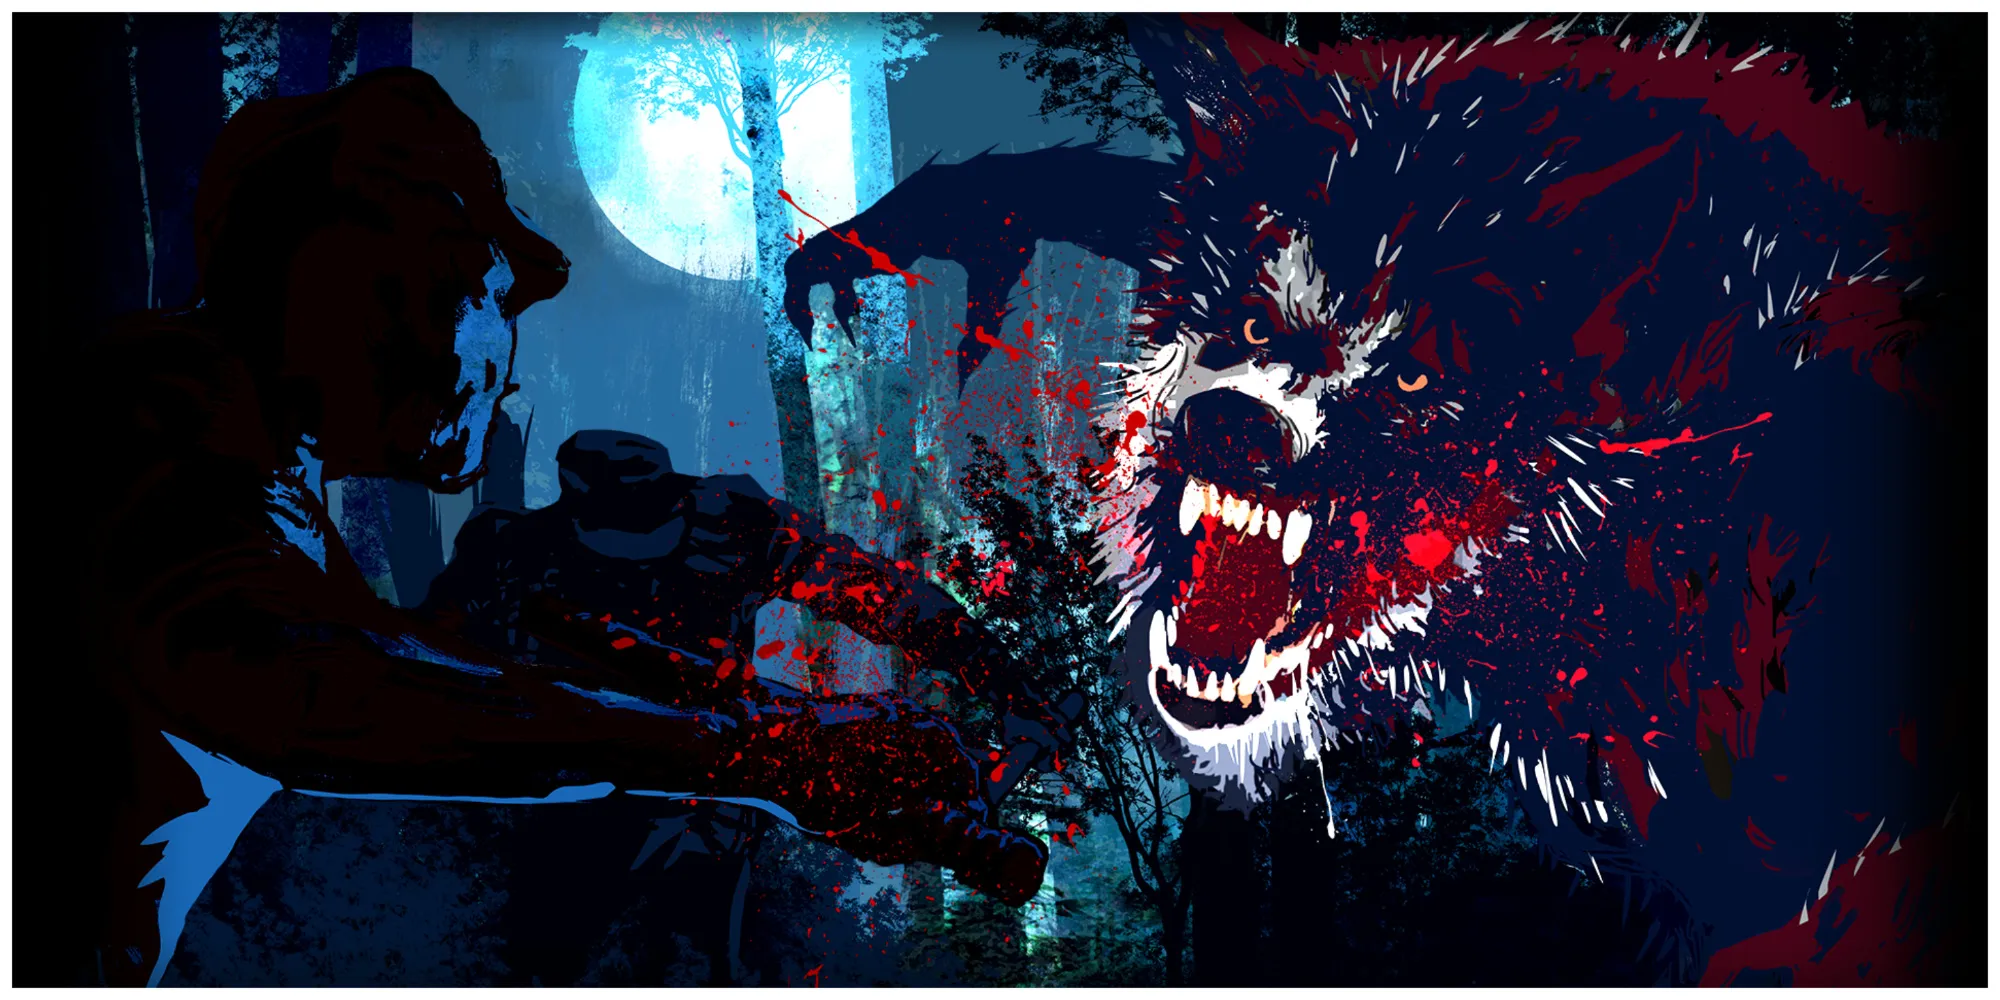 Werewolf: The Apocalypse – Heart Of The Forest